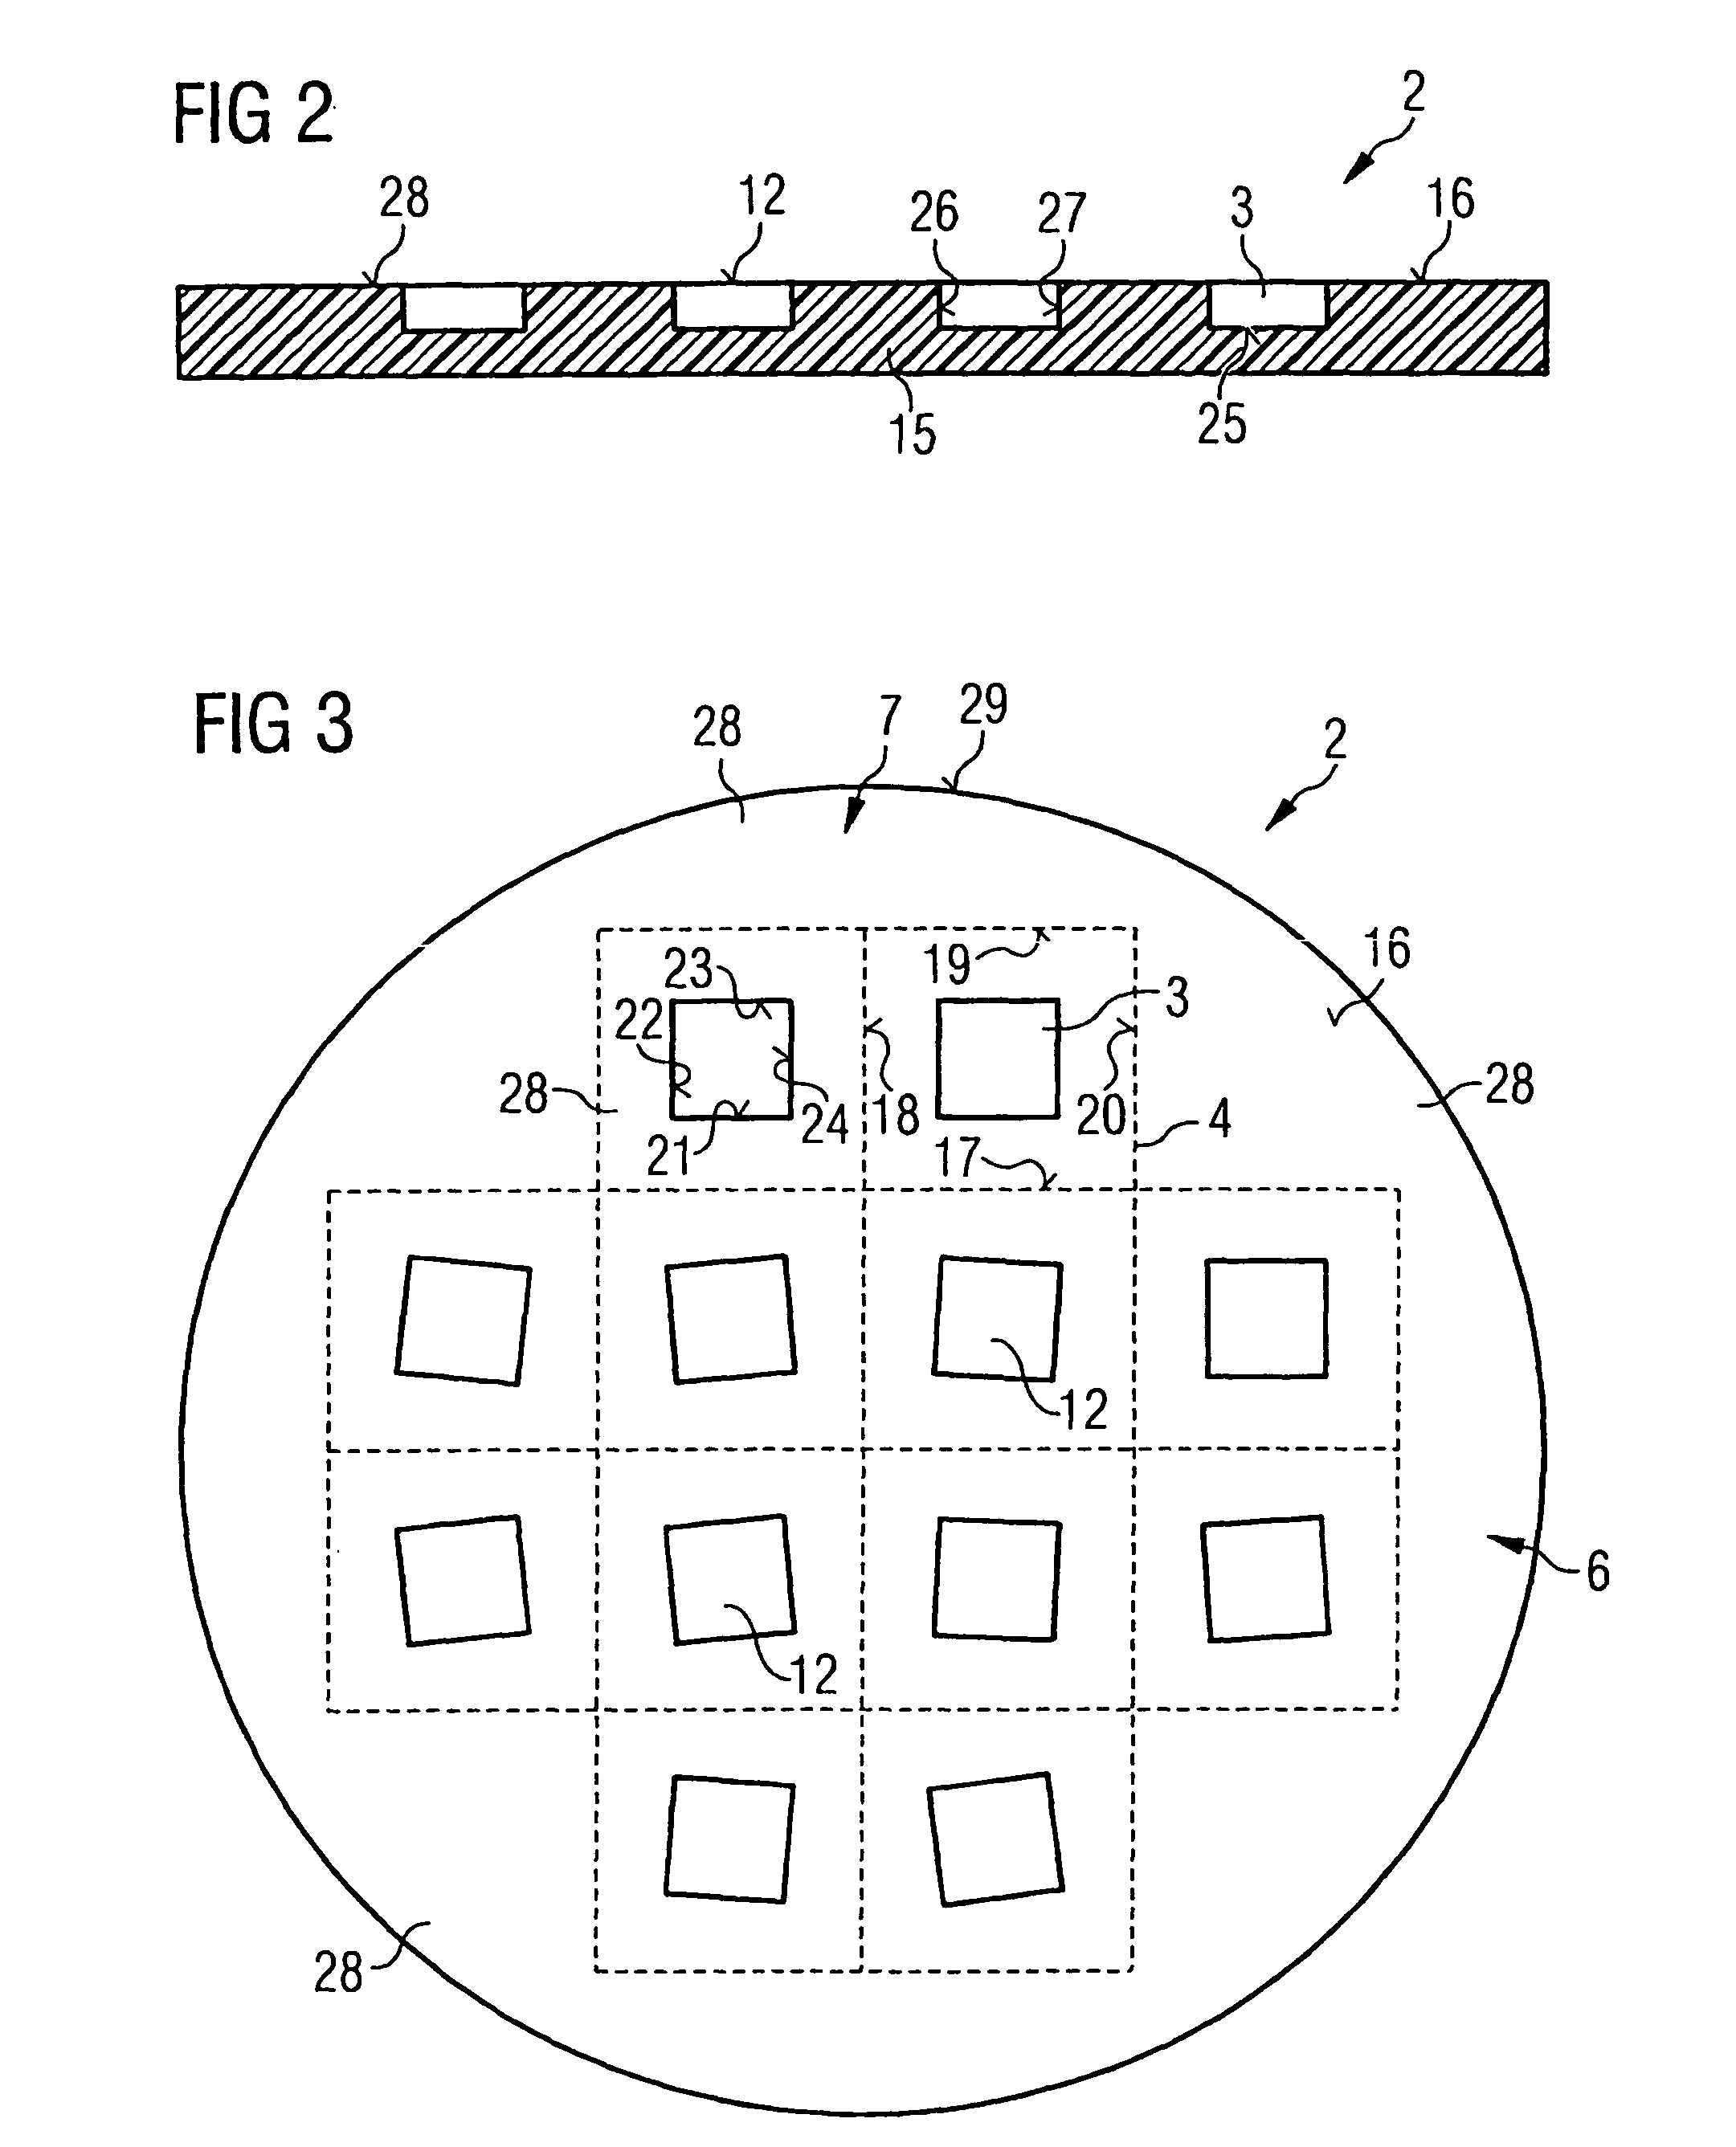 Method for applying rewiring to a panel while compensating for position errors of semiconductor chips in component positions of the panel